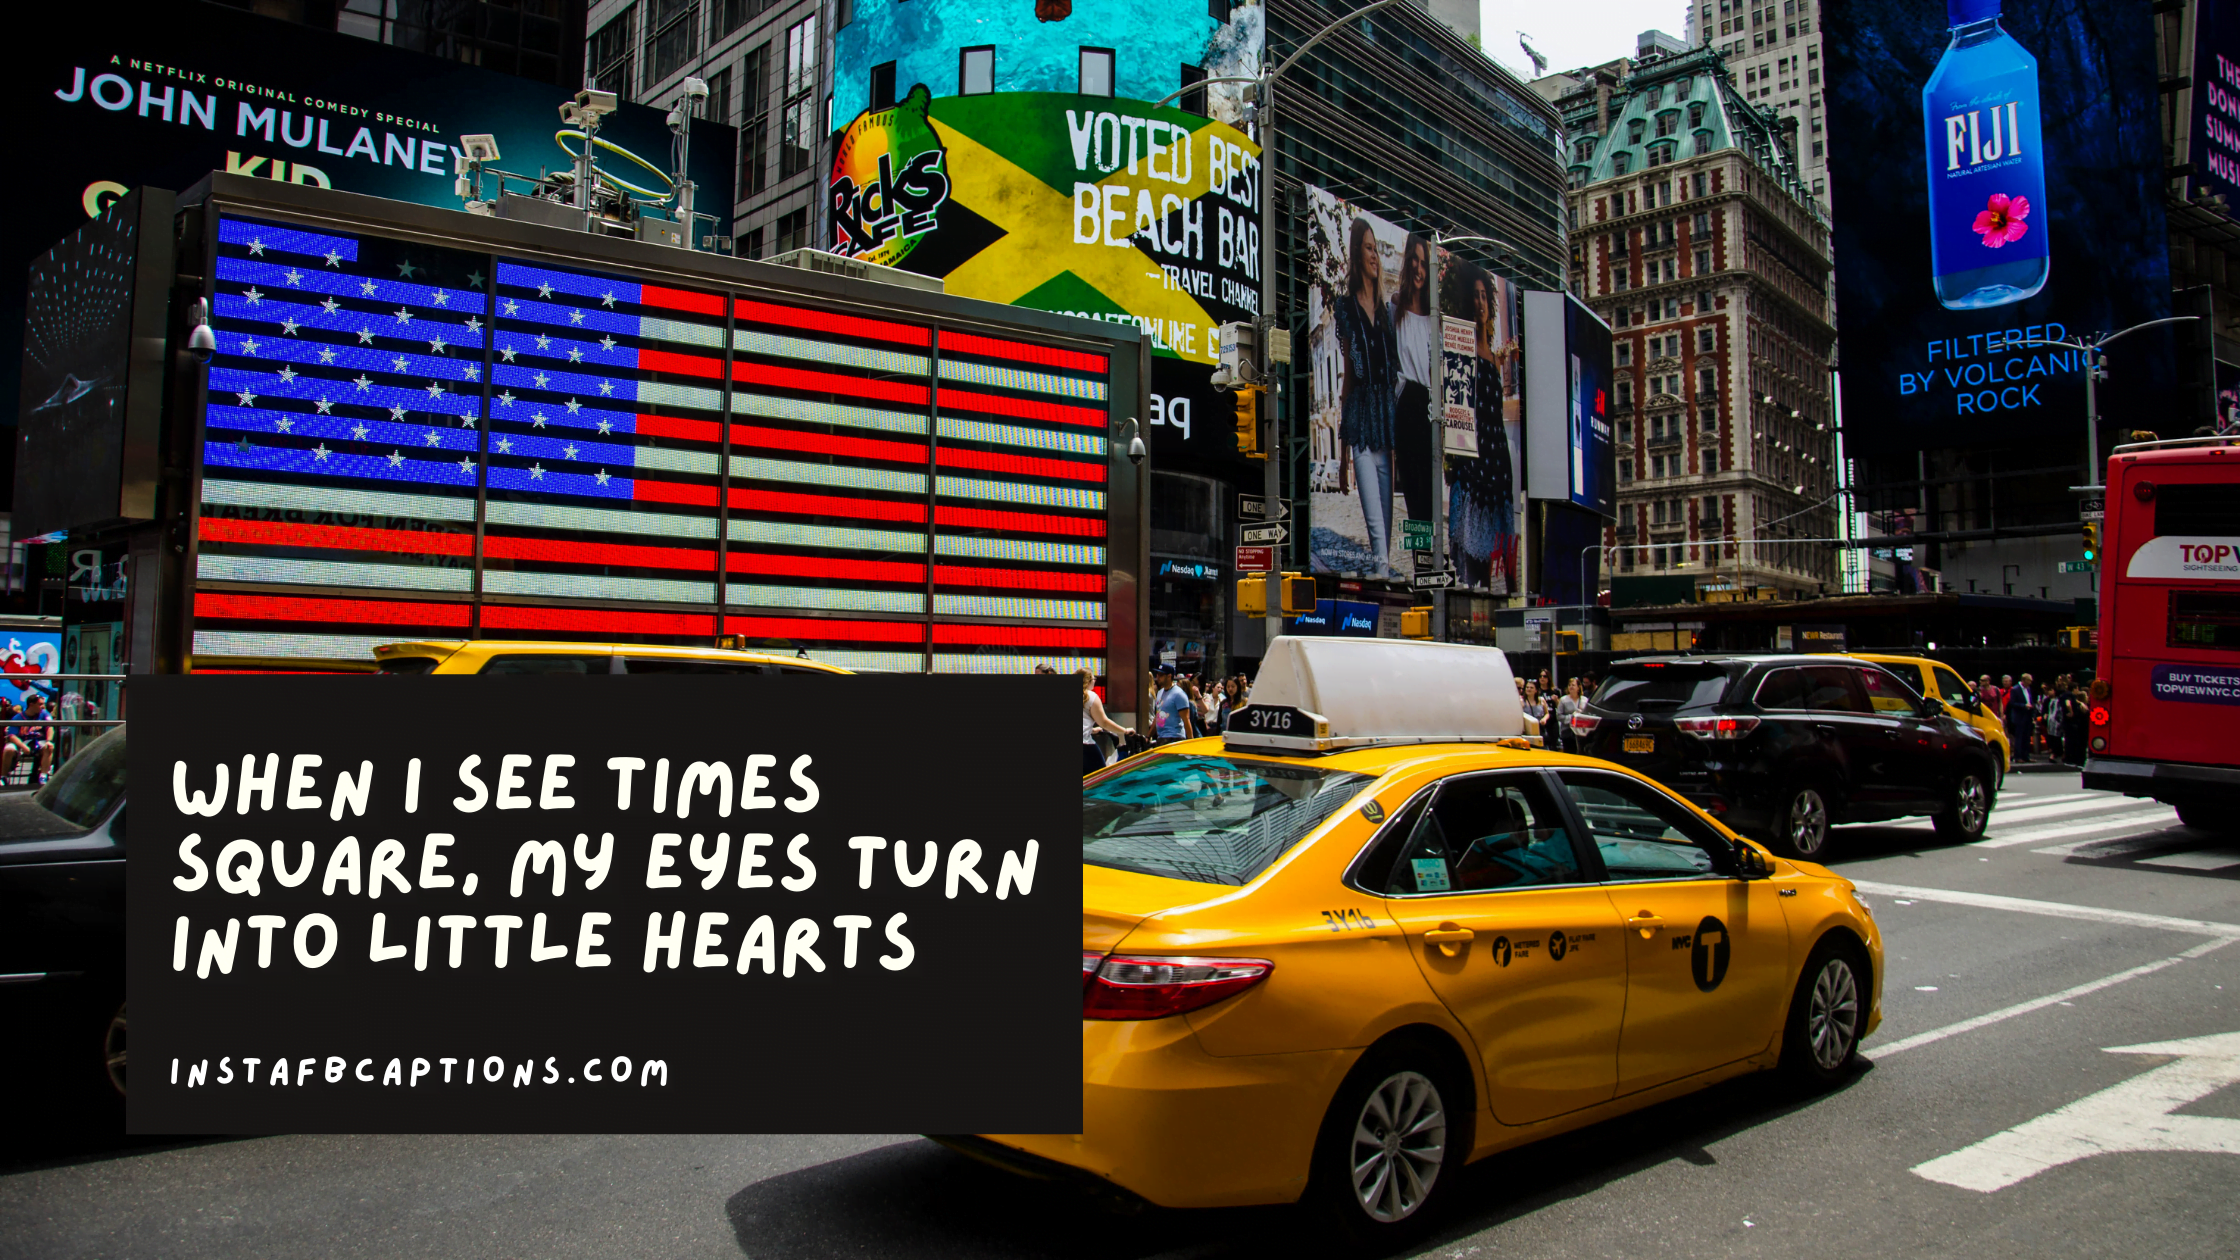 Good Times Square Captions  - Good Times Square Captions - 94 Times Square Instagram Captions Quotes Hashtags in 2023